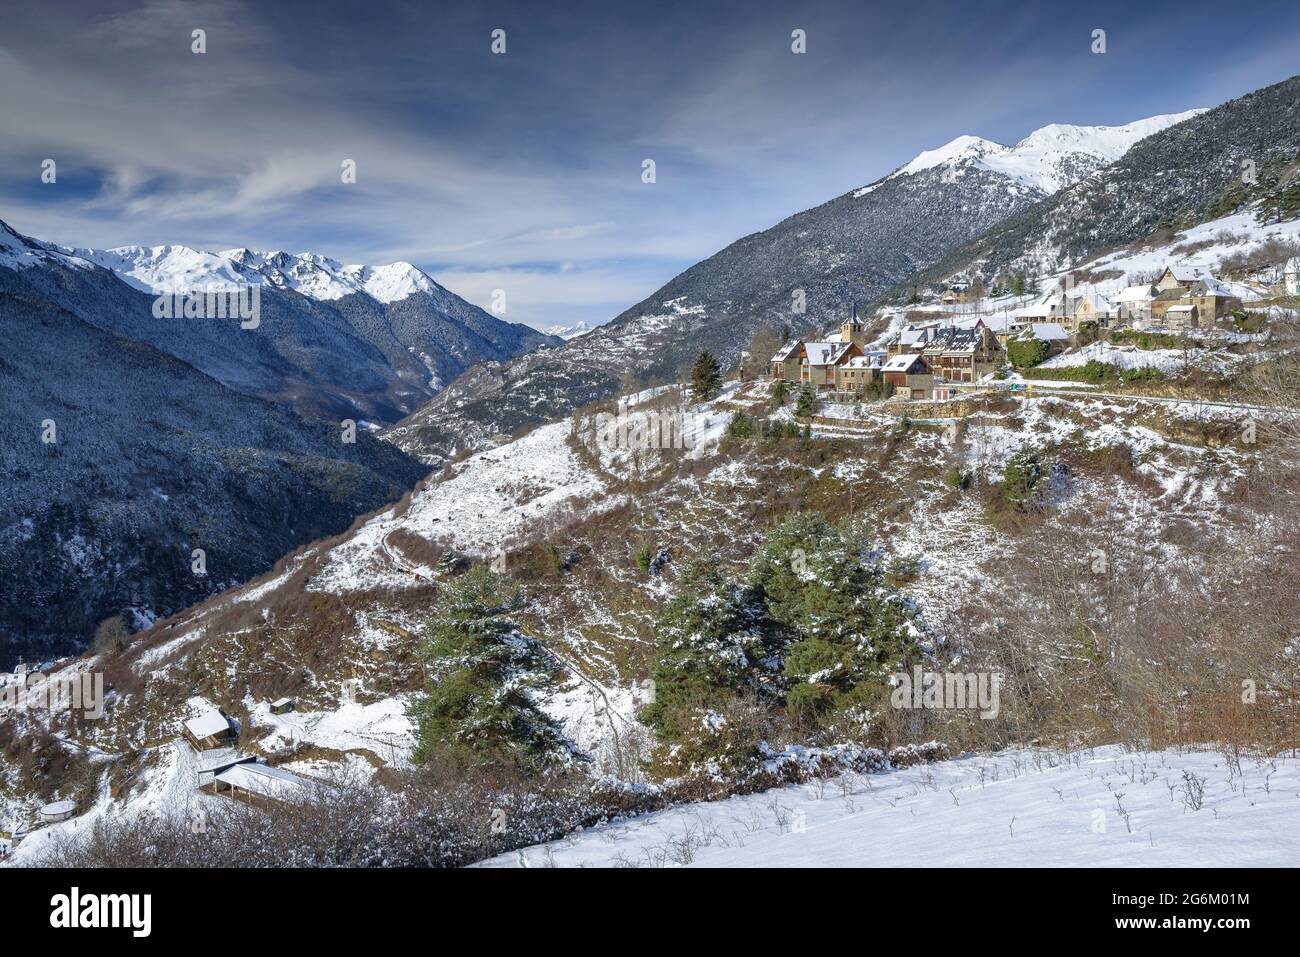 Snowy Aran Valley in winter, seen from the village of Mont. In the foreground, Montcorbau village (Aran Valley, Catalonia, Spain, Pyrenees) Stock Photo